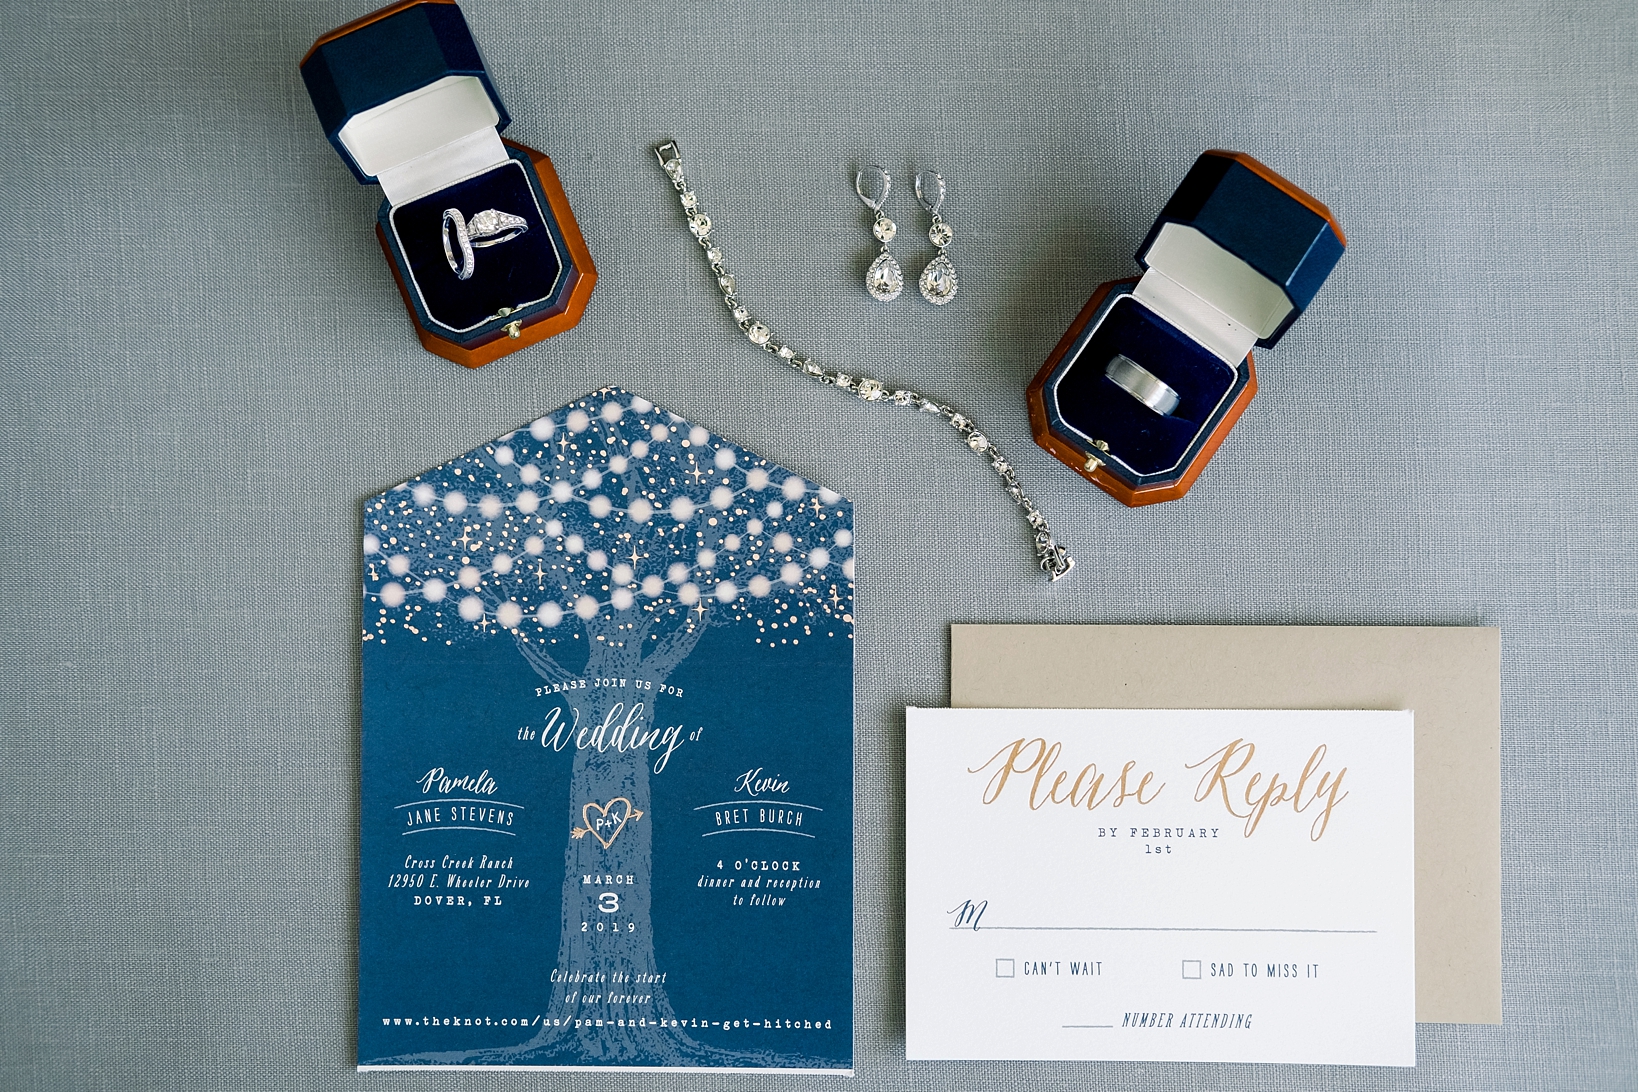 Wedding invitations surrounded by the Bride's jewellery and the wedding bands by Sarah and Ben Photo